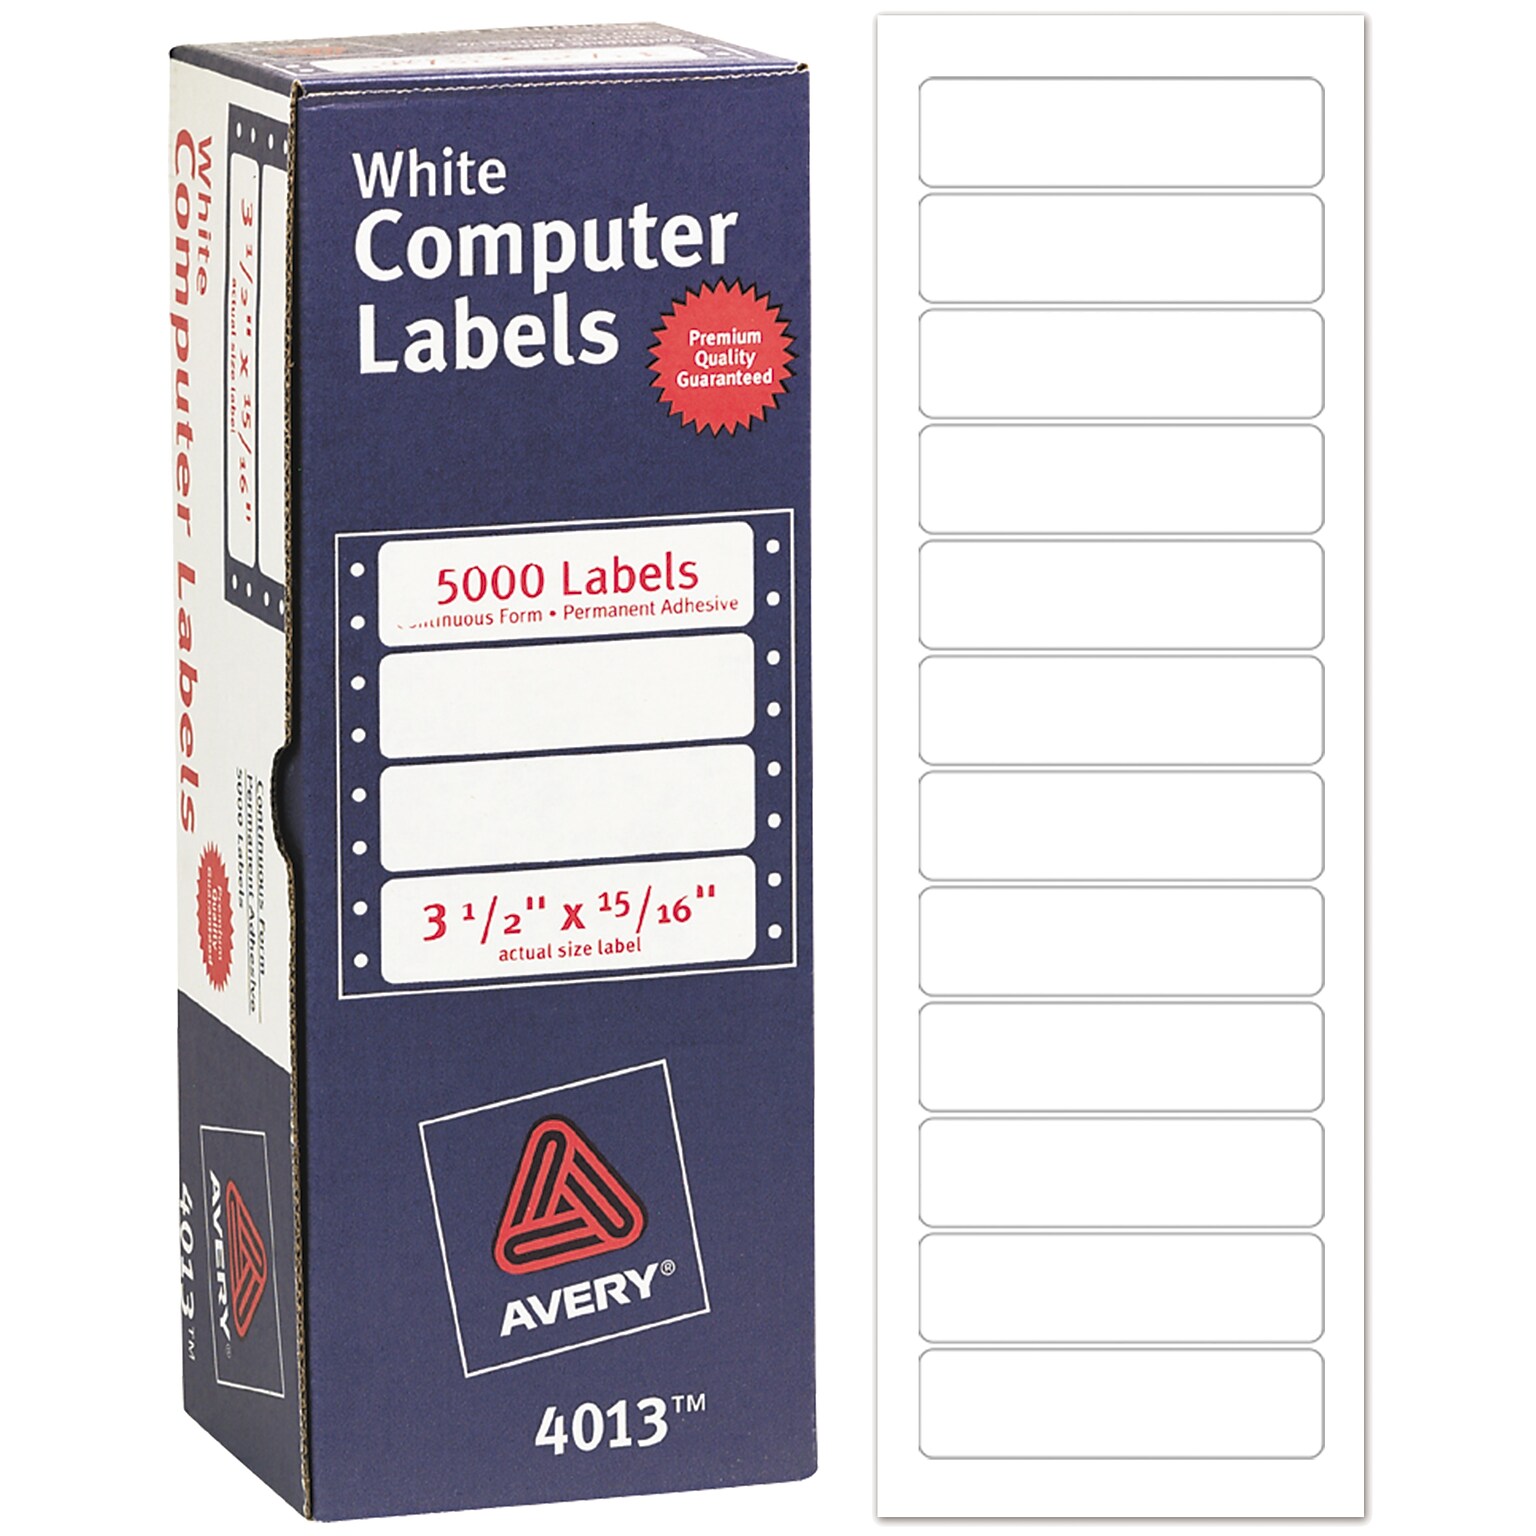 Avery Pin-Fed Continuous Form Computer Labels, 15/16 x 3 1/2, White, 1 Label Across, 4 1/4 Carrier, 5,000 Labels/Box (4013)